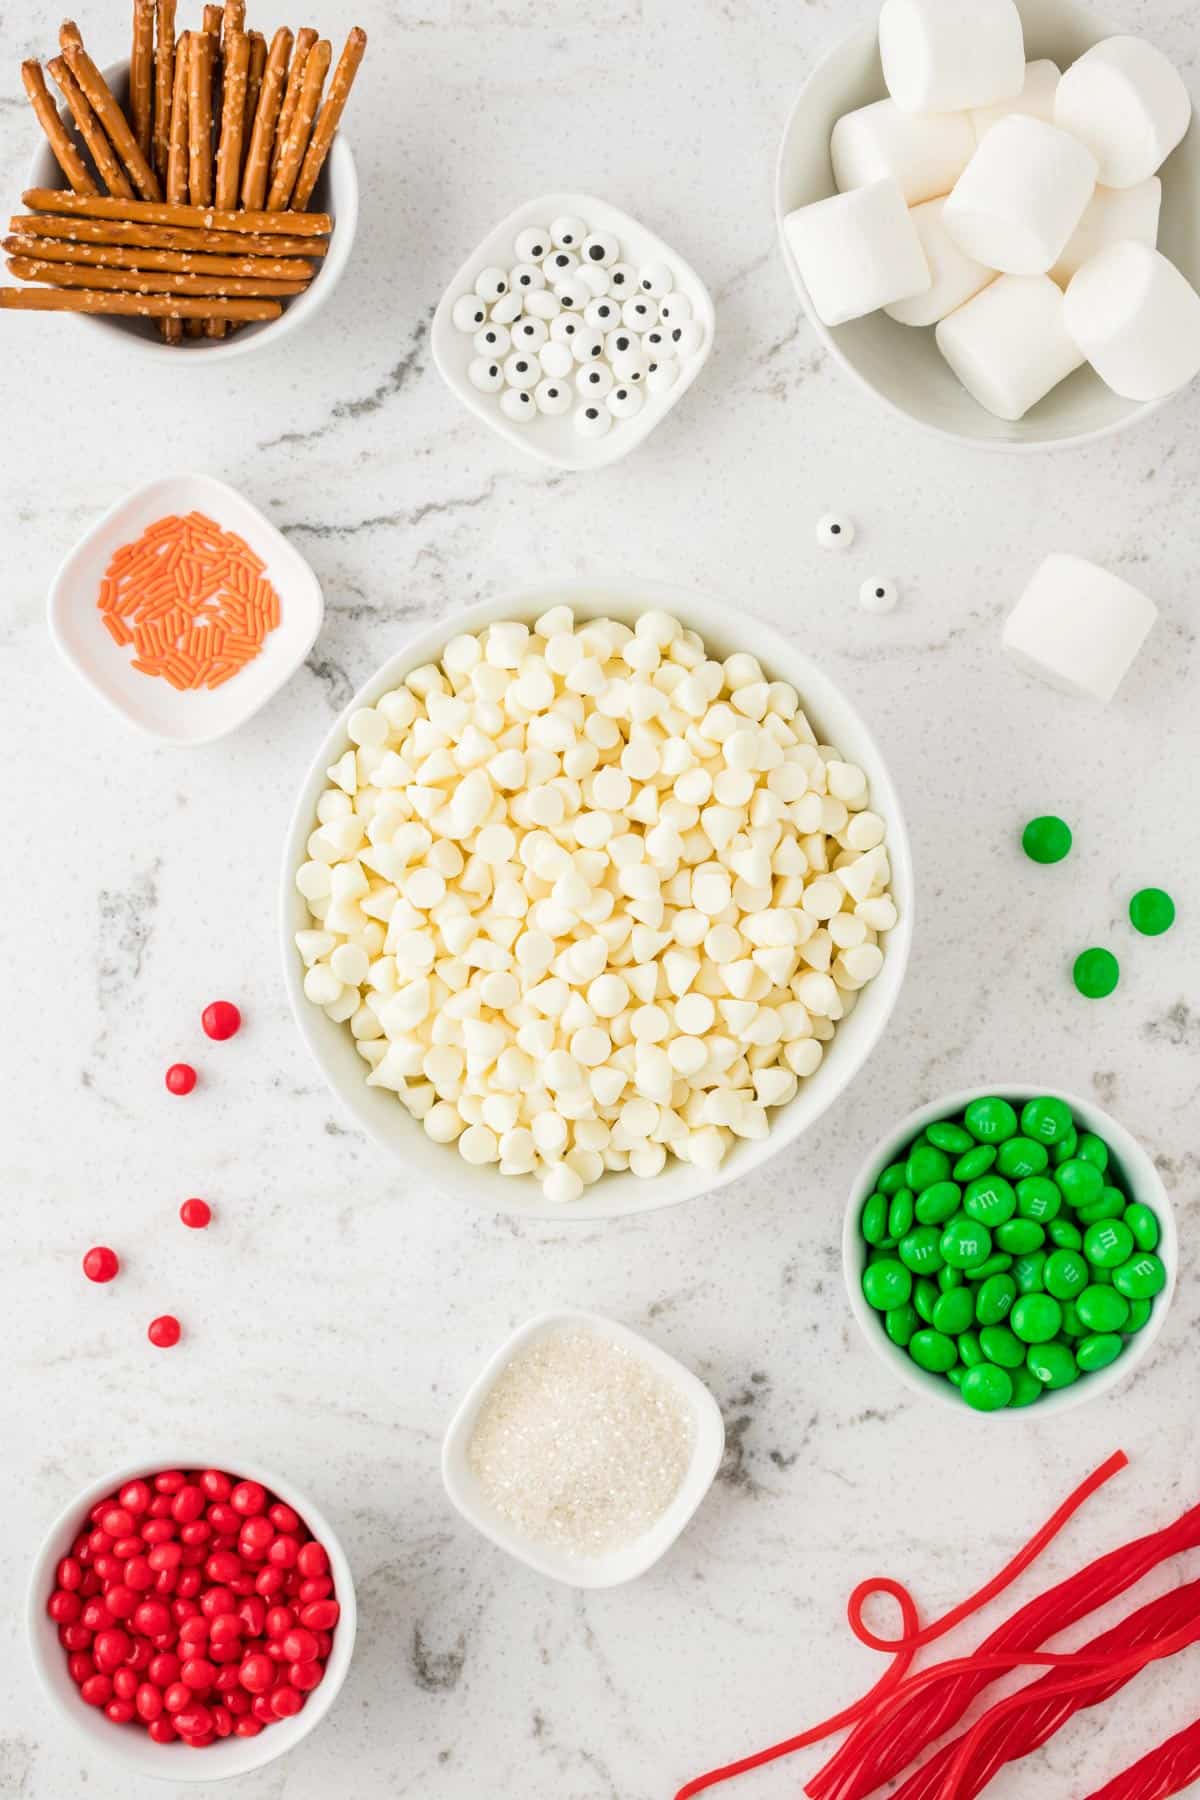 ingredients to make snowman bark in white bowls on white background